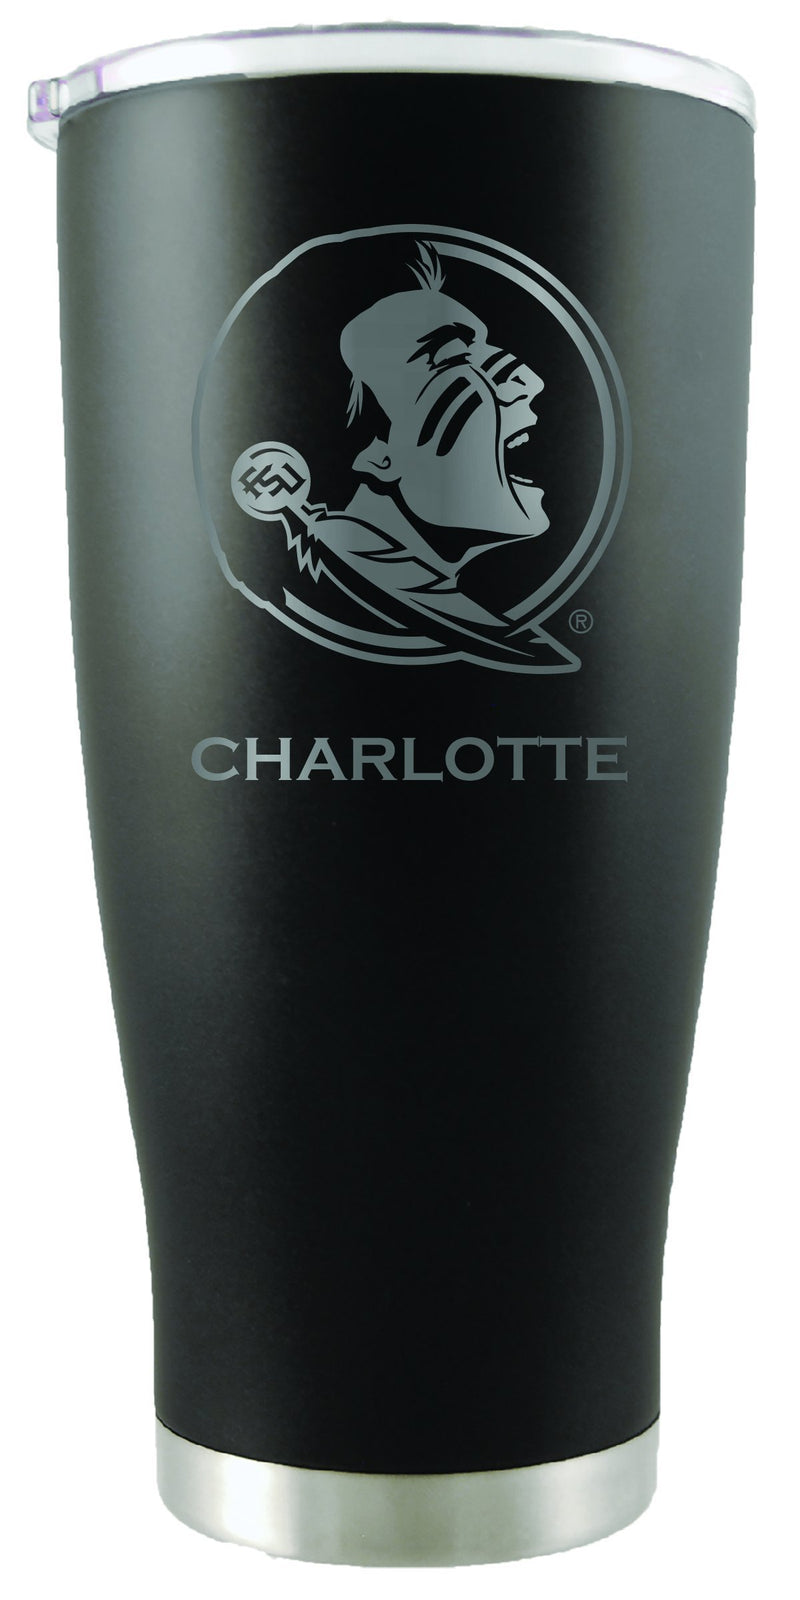 20oz Black Personalized Stainless Steel Tumbler | Florida State
COL, CurrentProduct, Drinkware_category_All, Florida State Seminoles, FSU, Personalized_Personalized
The Memory Company